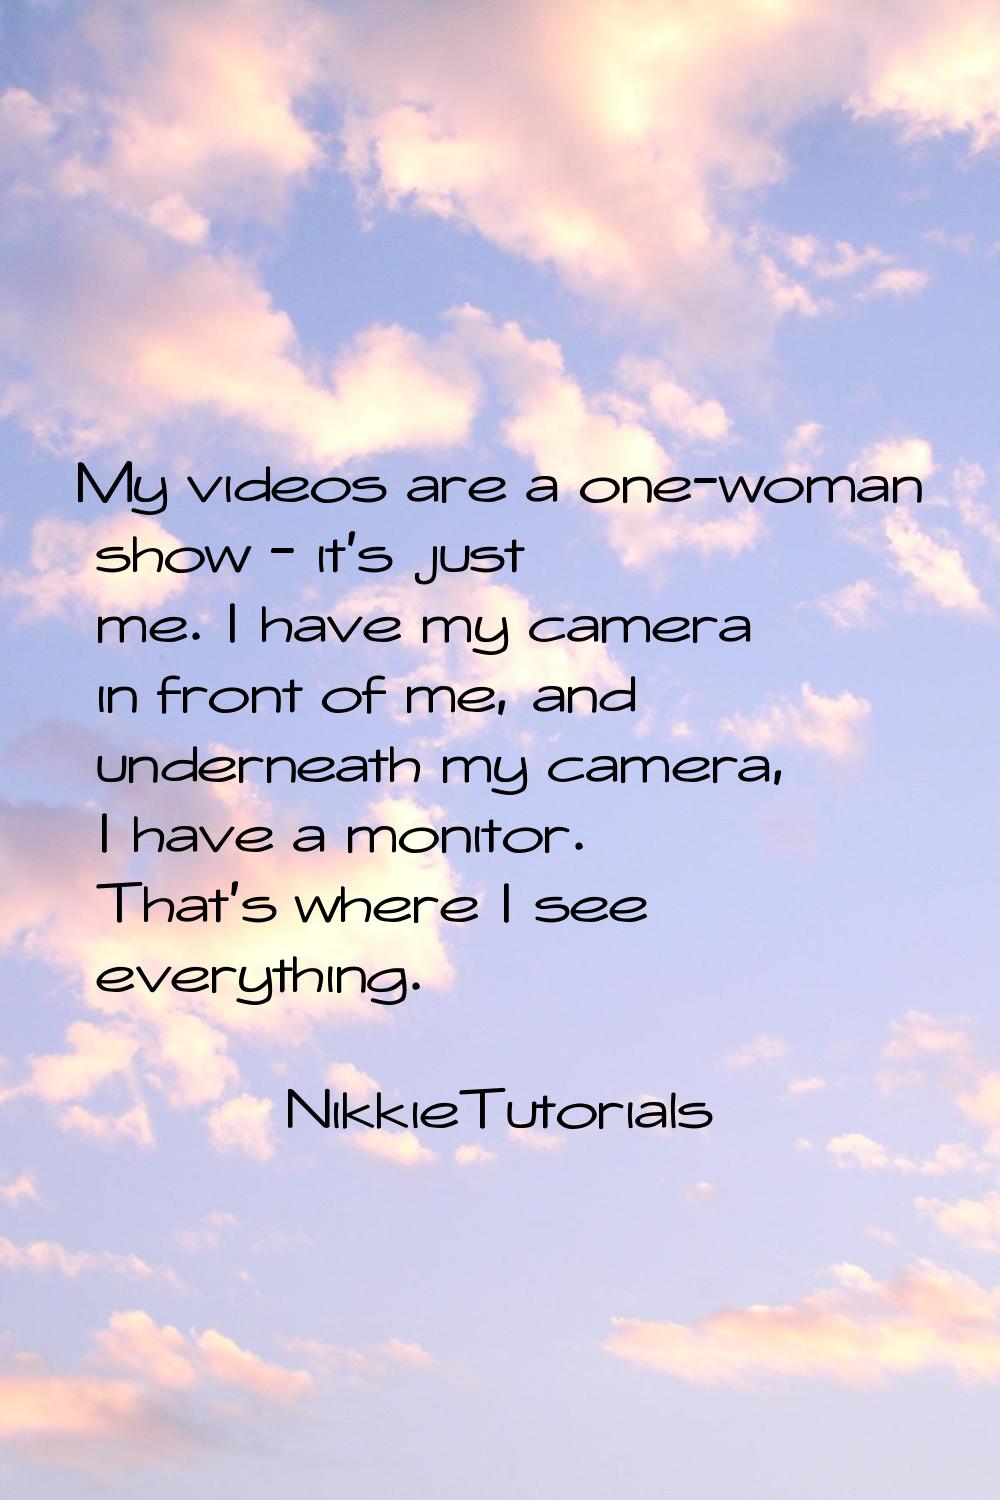 My videos are a one-woman show - it's just me. I have my camera in front of me, and underneath my c